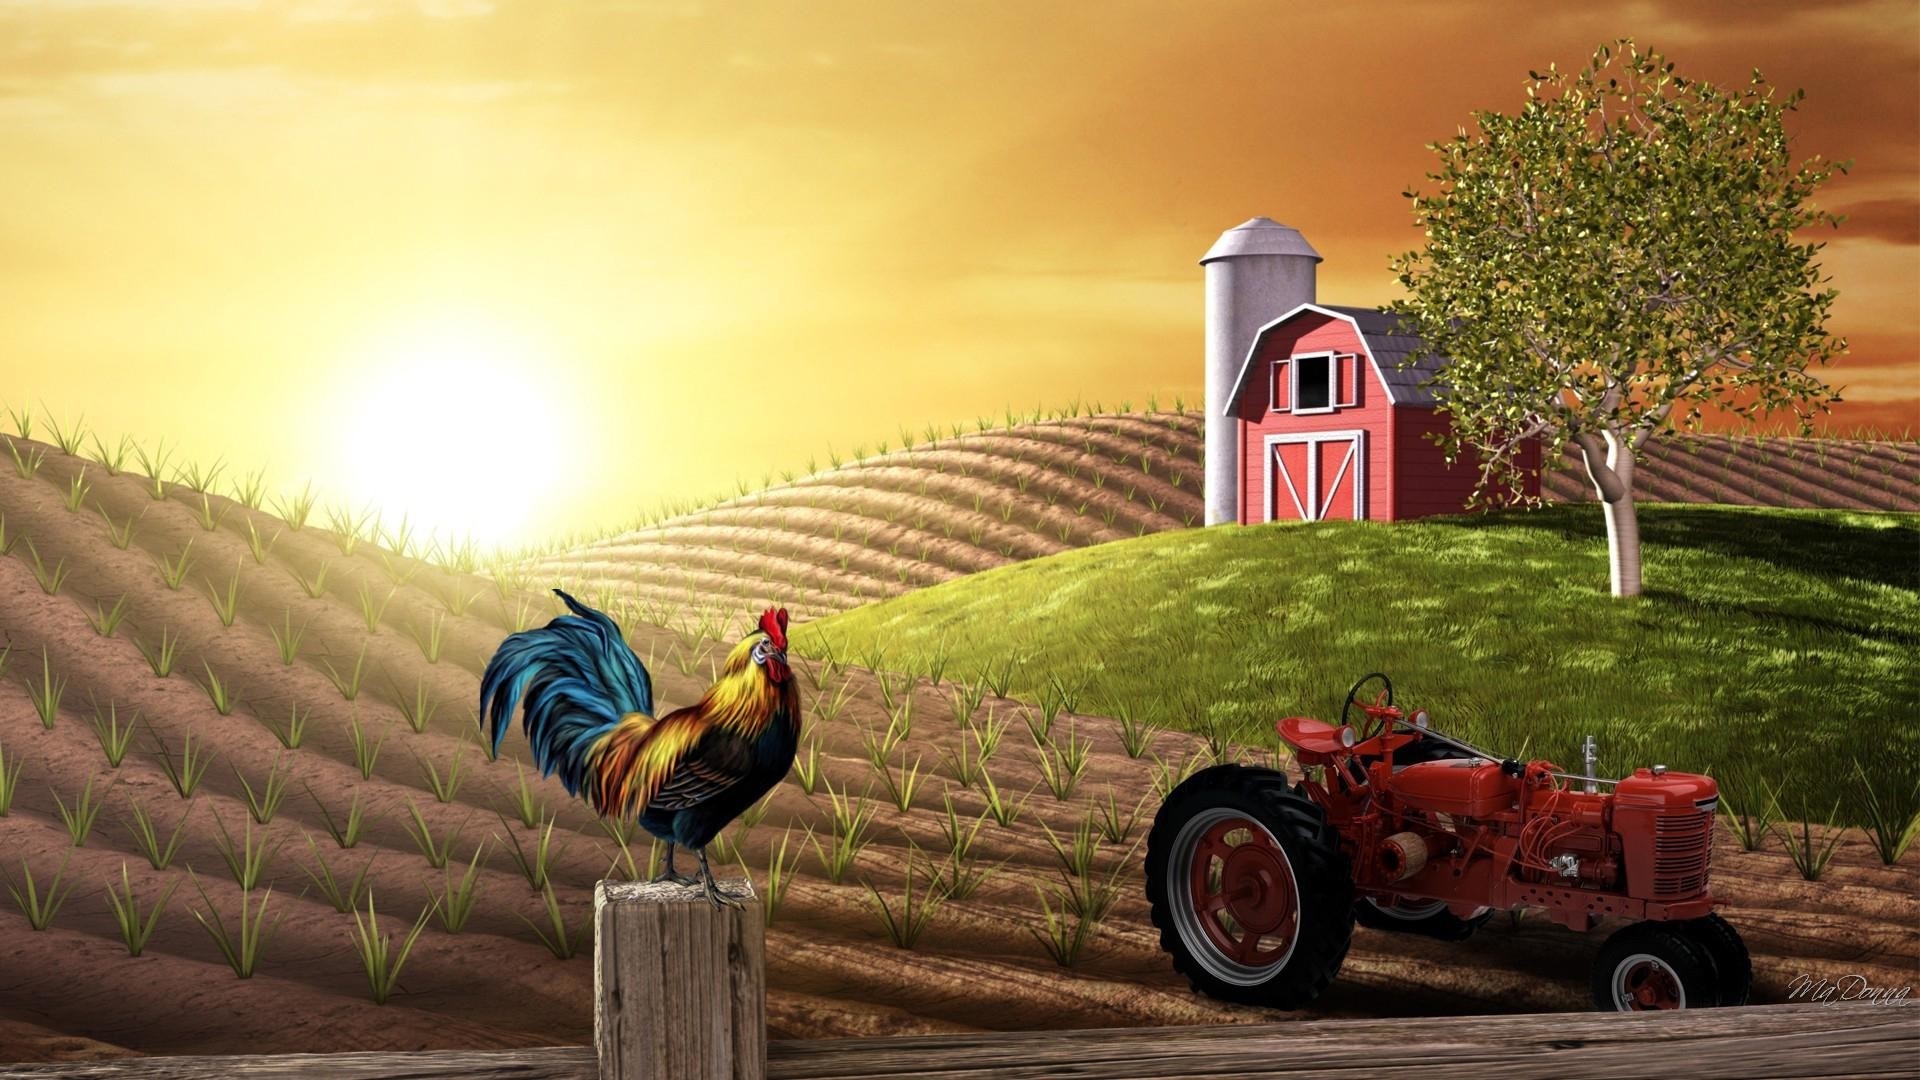 Farm Wallpapers on